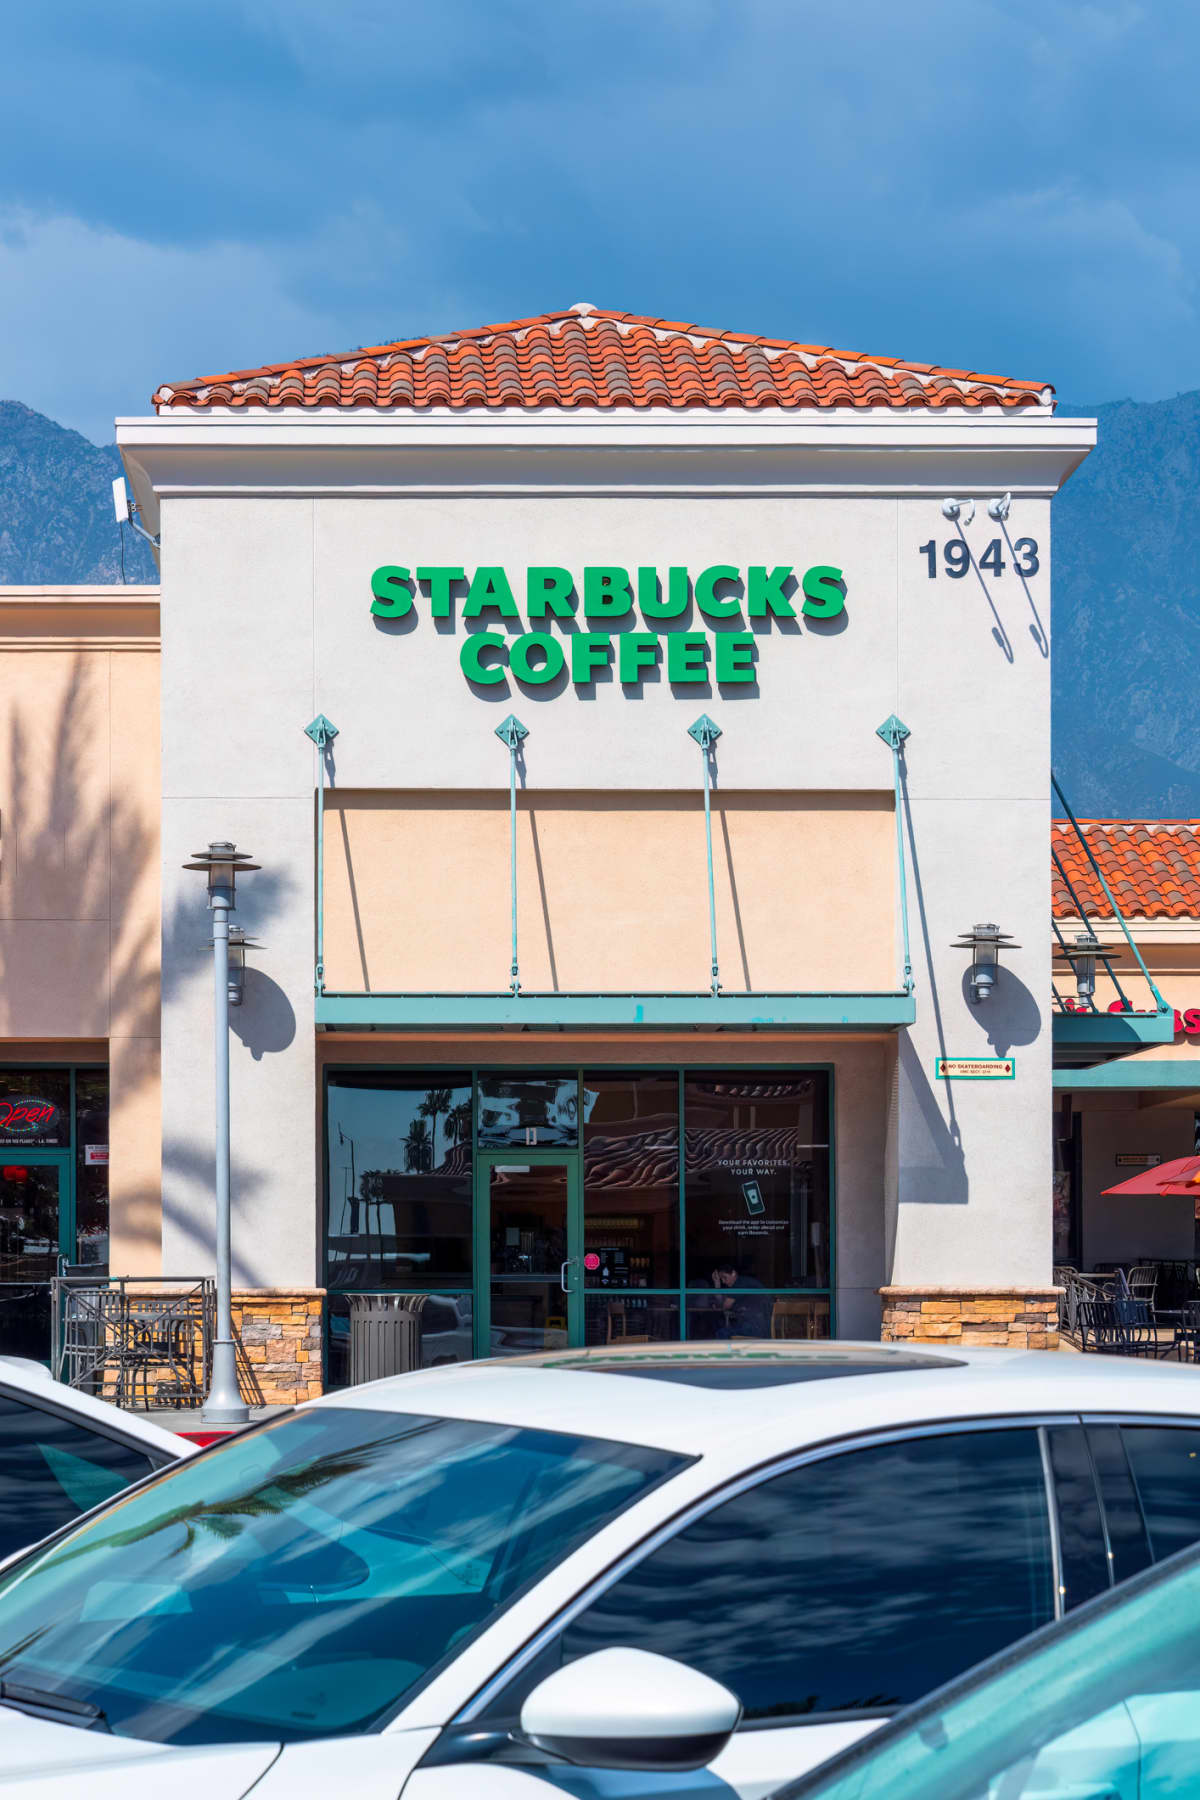 Building with Starbucks Coffee sign